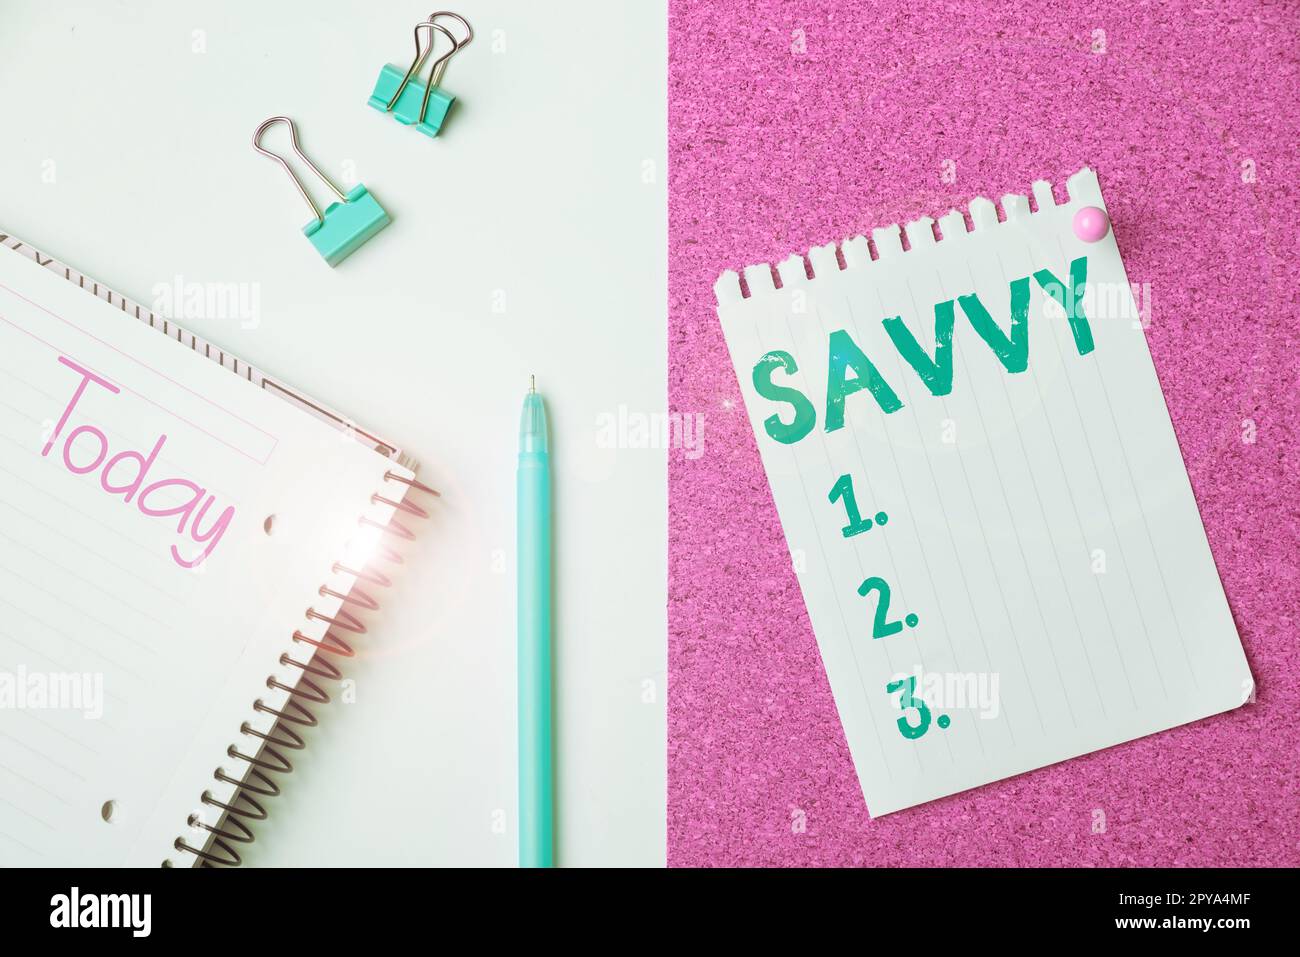 Writing displaying text Savvy. Business approach having perception, comprehension in practical matters Stock Photo